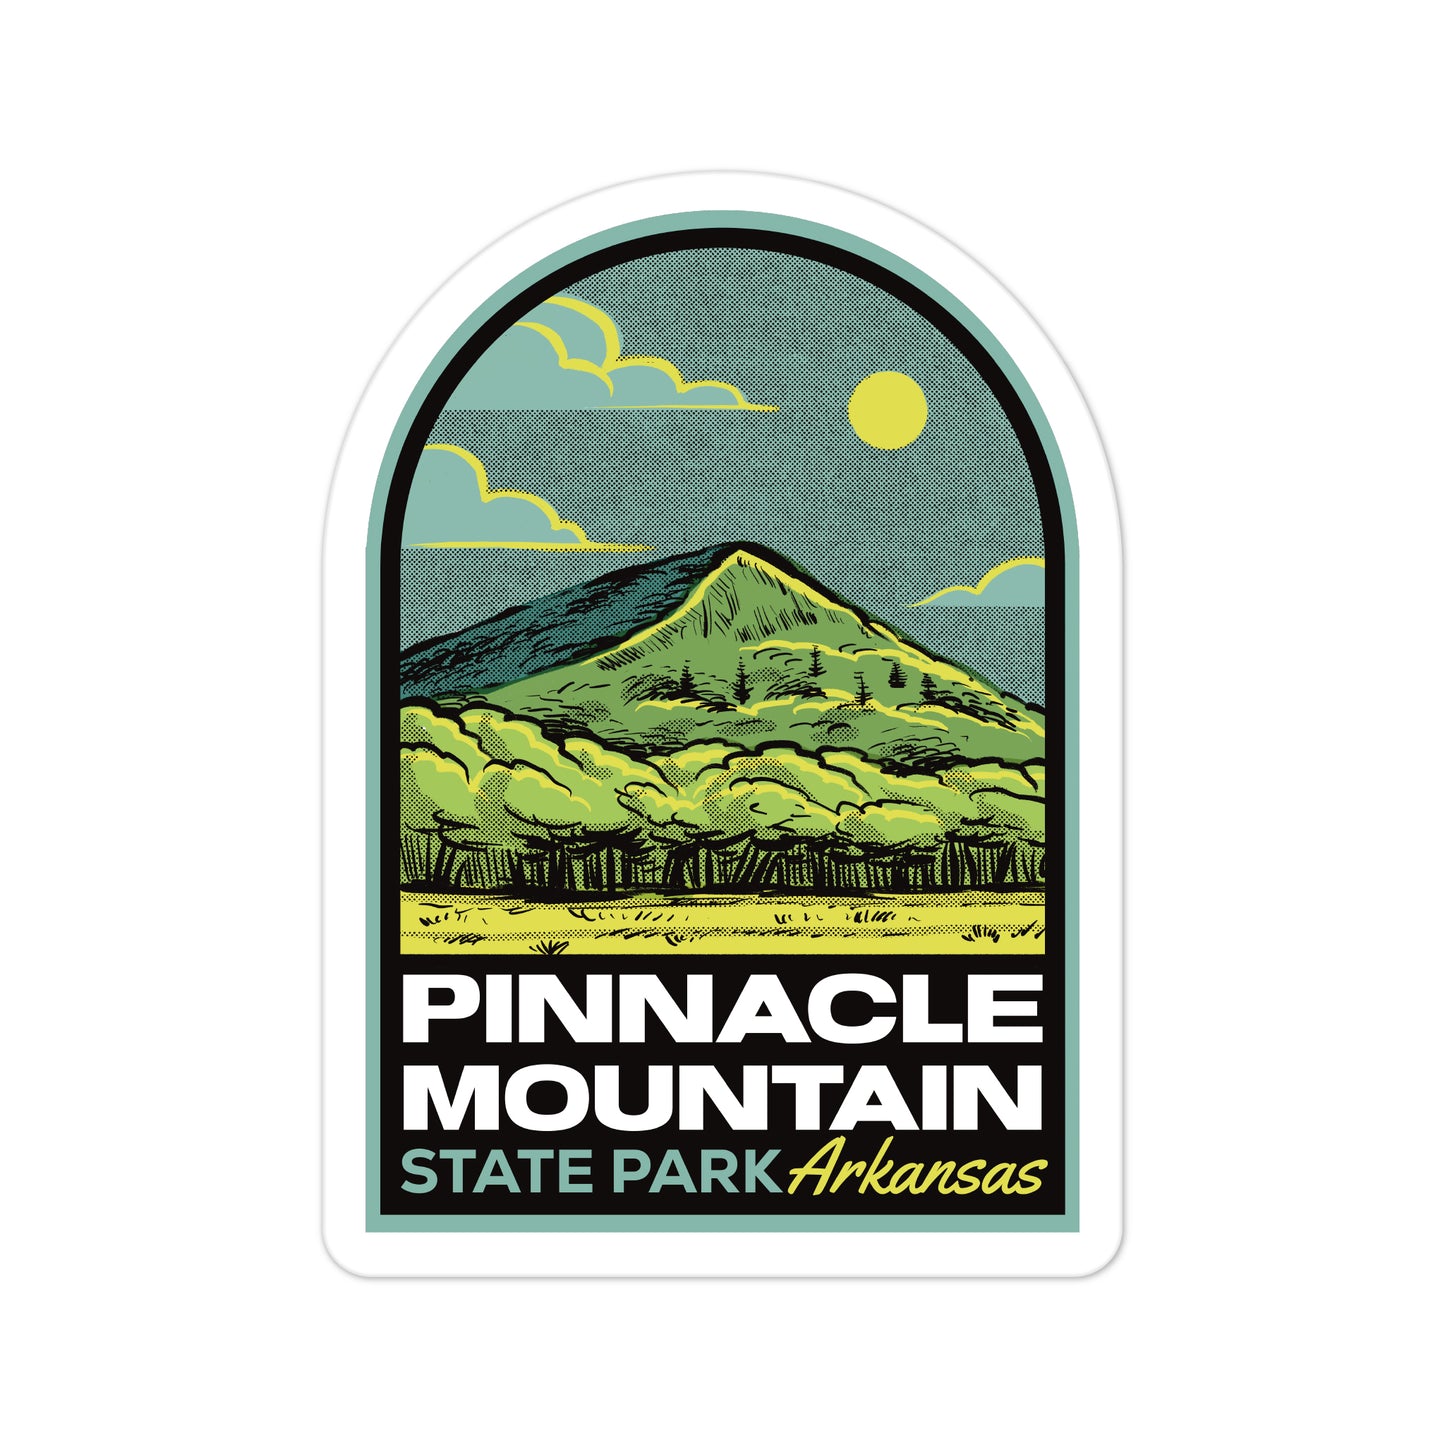 A sticker of Pinnacle Mountain State Park